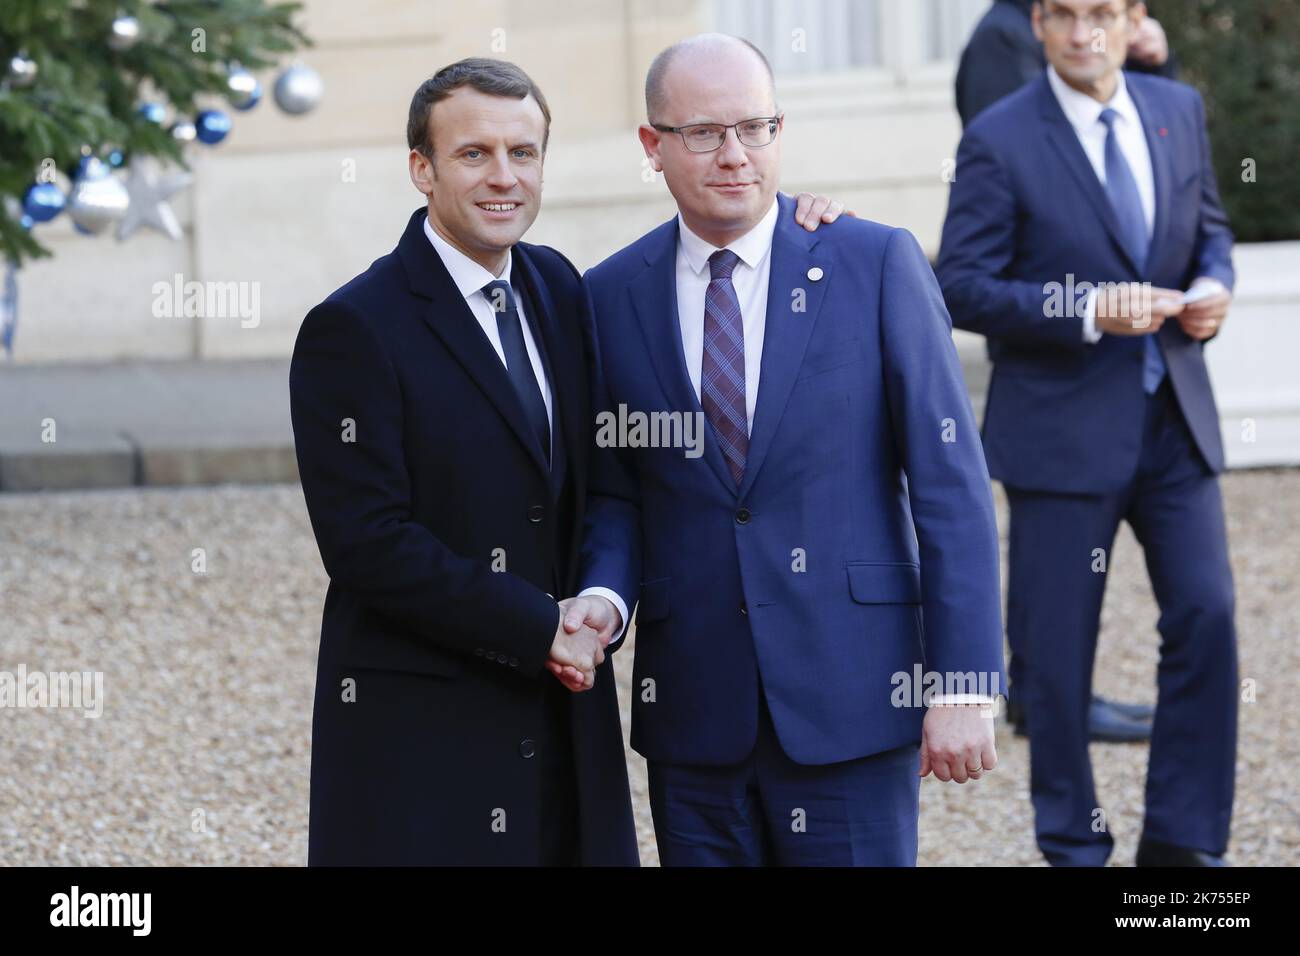 French President Emmanuel Macron welcomes Prime Minister of the Czech Republic Bohuslav Sobotka as he arrives at the Elysee palace in Paris, for a lunch hosted by the French President as part of the One Planet Summit.  Macron is hosting the One Planet climat summit, which gathers world leaders, philantropists and other committed private individuals to discuss climate change. 12.12.2017 Stock Photo